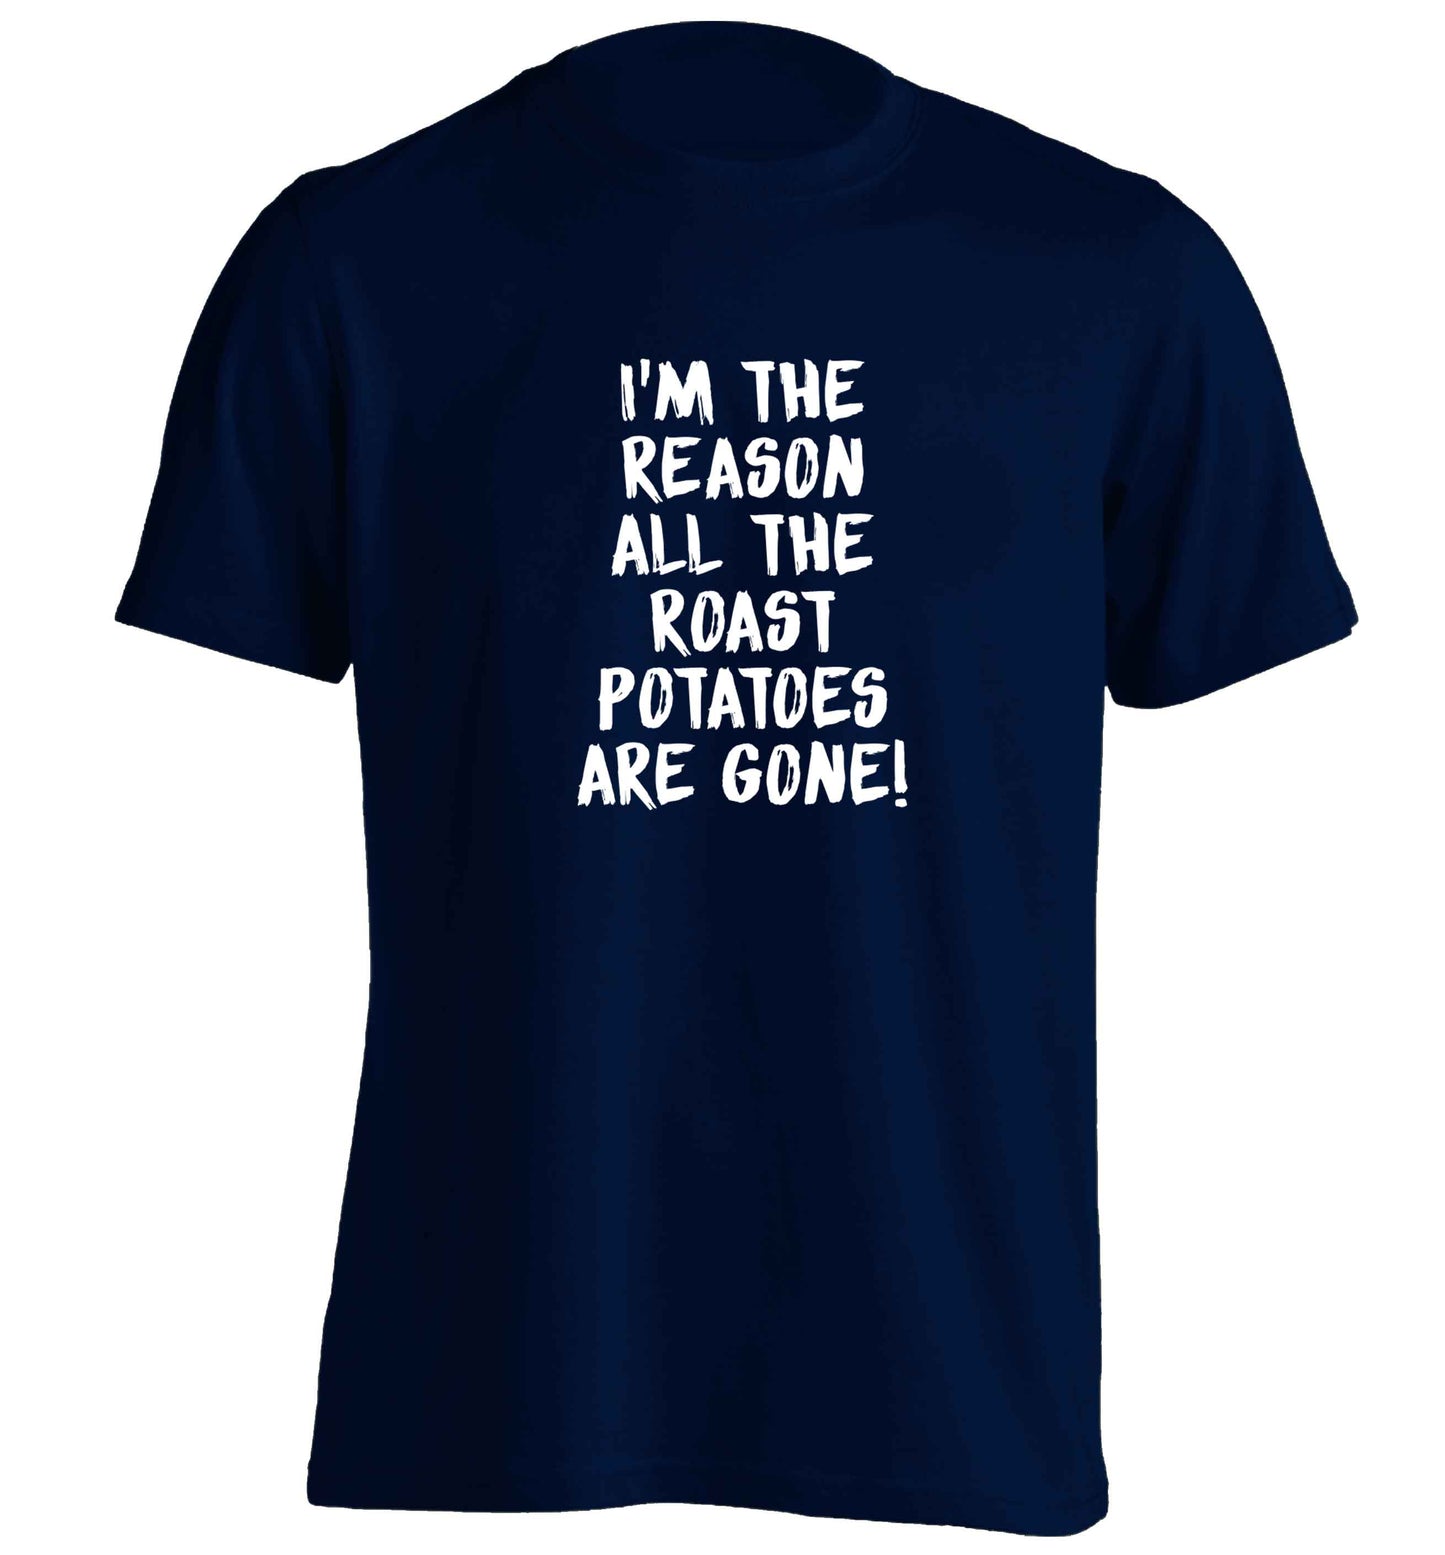 I'm the reason all the roast potatoes are gone adults unisex navy Tshirt 2XL